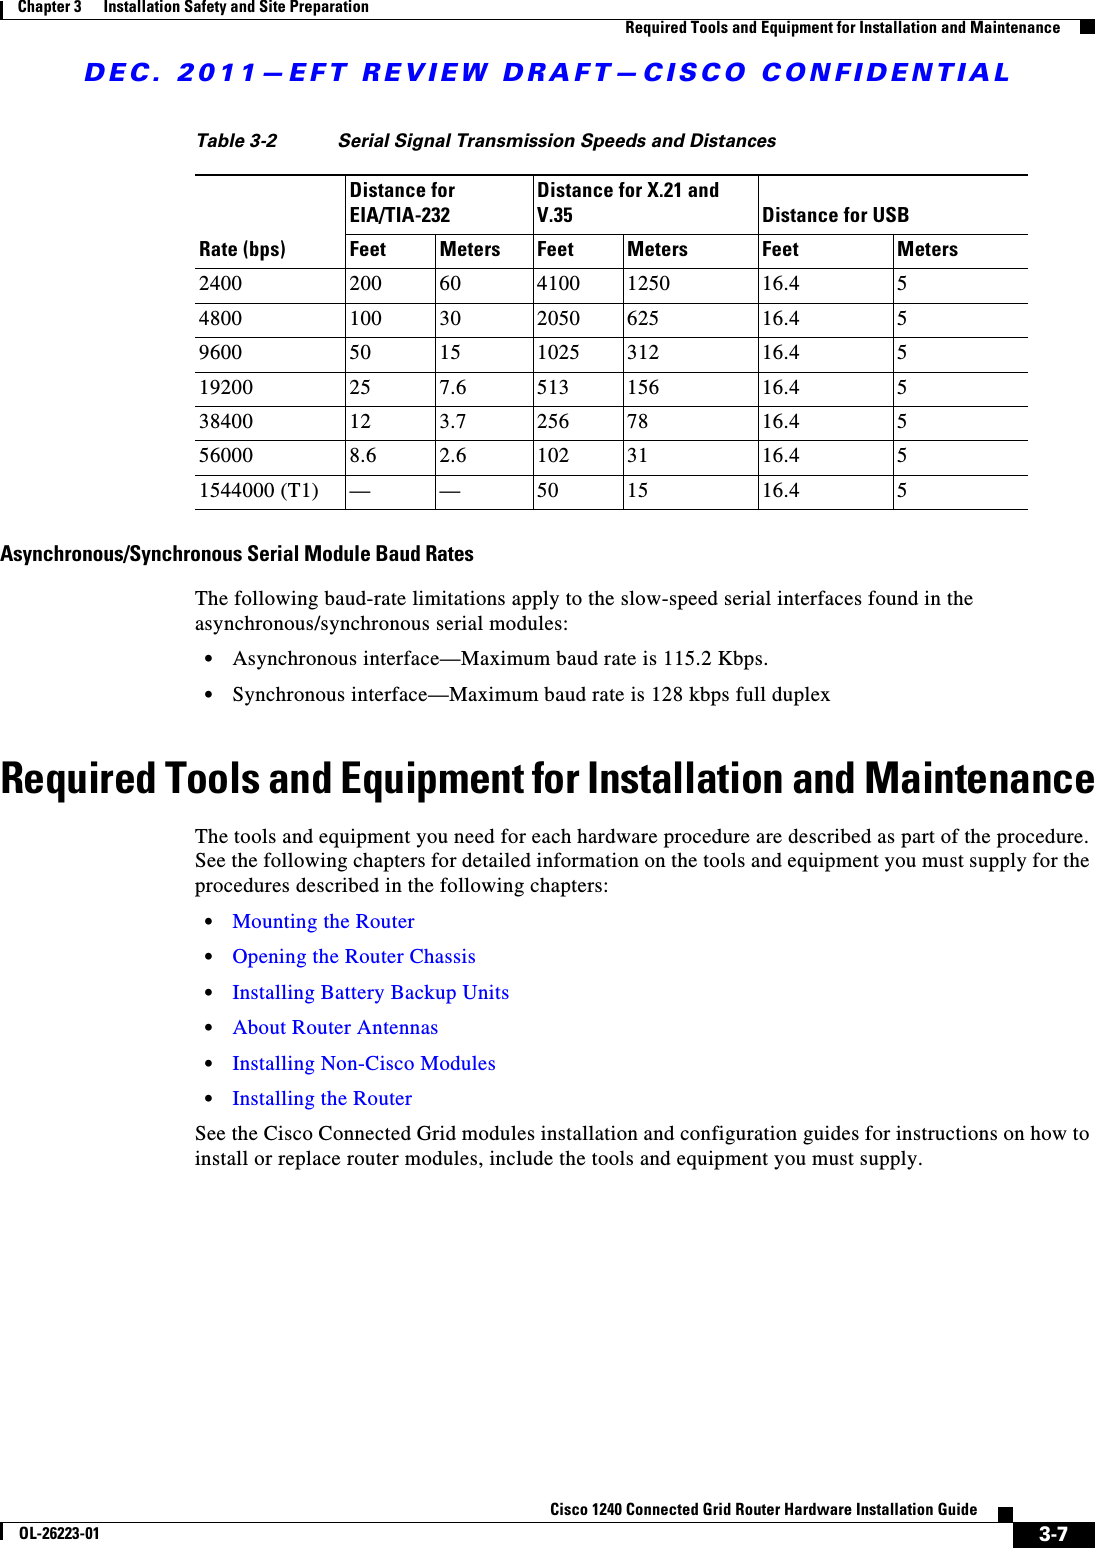 DEC. 2011—EFT REVIEW DRAFT—CISCO CONFIDENTIAL3-7Cisco 1240 Connected Grid Router Hardware Installation GuideOL-26223-01Chapter 3      Installation Safety and Site Preparation  Required Tools and Equipment for Installation and MaintenanceAsynchronous/Synchronous Serial Module Baud RatesThe following baud-rate limitations apply to the slow-speed serial interfaces found in the asynchronous/synchronous serial modules:  • Asynchronous interface—Maximum baud rate is 115.2 Kbps.  • Synchronous interface—Maximum baud rate is 128 kbps full duplexRequired Tools and Equipment for Installation and MaintenanceThe tools and equipment you need for each hardware procedure are described as part of the procedure. See the following chapters for detailed information on the tools and equipment you must supply for the procedures described in the following chapters:  • Mounting the Router  • Opening the Router Chassis  • Installing Battery Backup Units  • About Router Antennas  • Installing Non-Cisco Modules  • Installing the RouterSee the Cisco Connected Grid modules installation and configuration guides for instructions on how to install or replace router modules, include the tools and equipment you must supply.Table 3-2 Serial Signal Transmission Speeds and Distances Distance for EIA/TIA-232 Distance for X.21 and V.35 Distance for USBRate (bps) Feet Meters Feet Meters Feet Meters2400 200 60 4100 1250 16.4 54800 100 30 2050 625 16.4 59600 50 15 1025 312 16.4 519200 25 7.6 513 156 16.4 538400 12 3.7 256 78 16.4 556000 8.6 2.6 102 31 16.4 51544000 (T1) — — 50 15 16.4 5